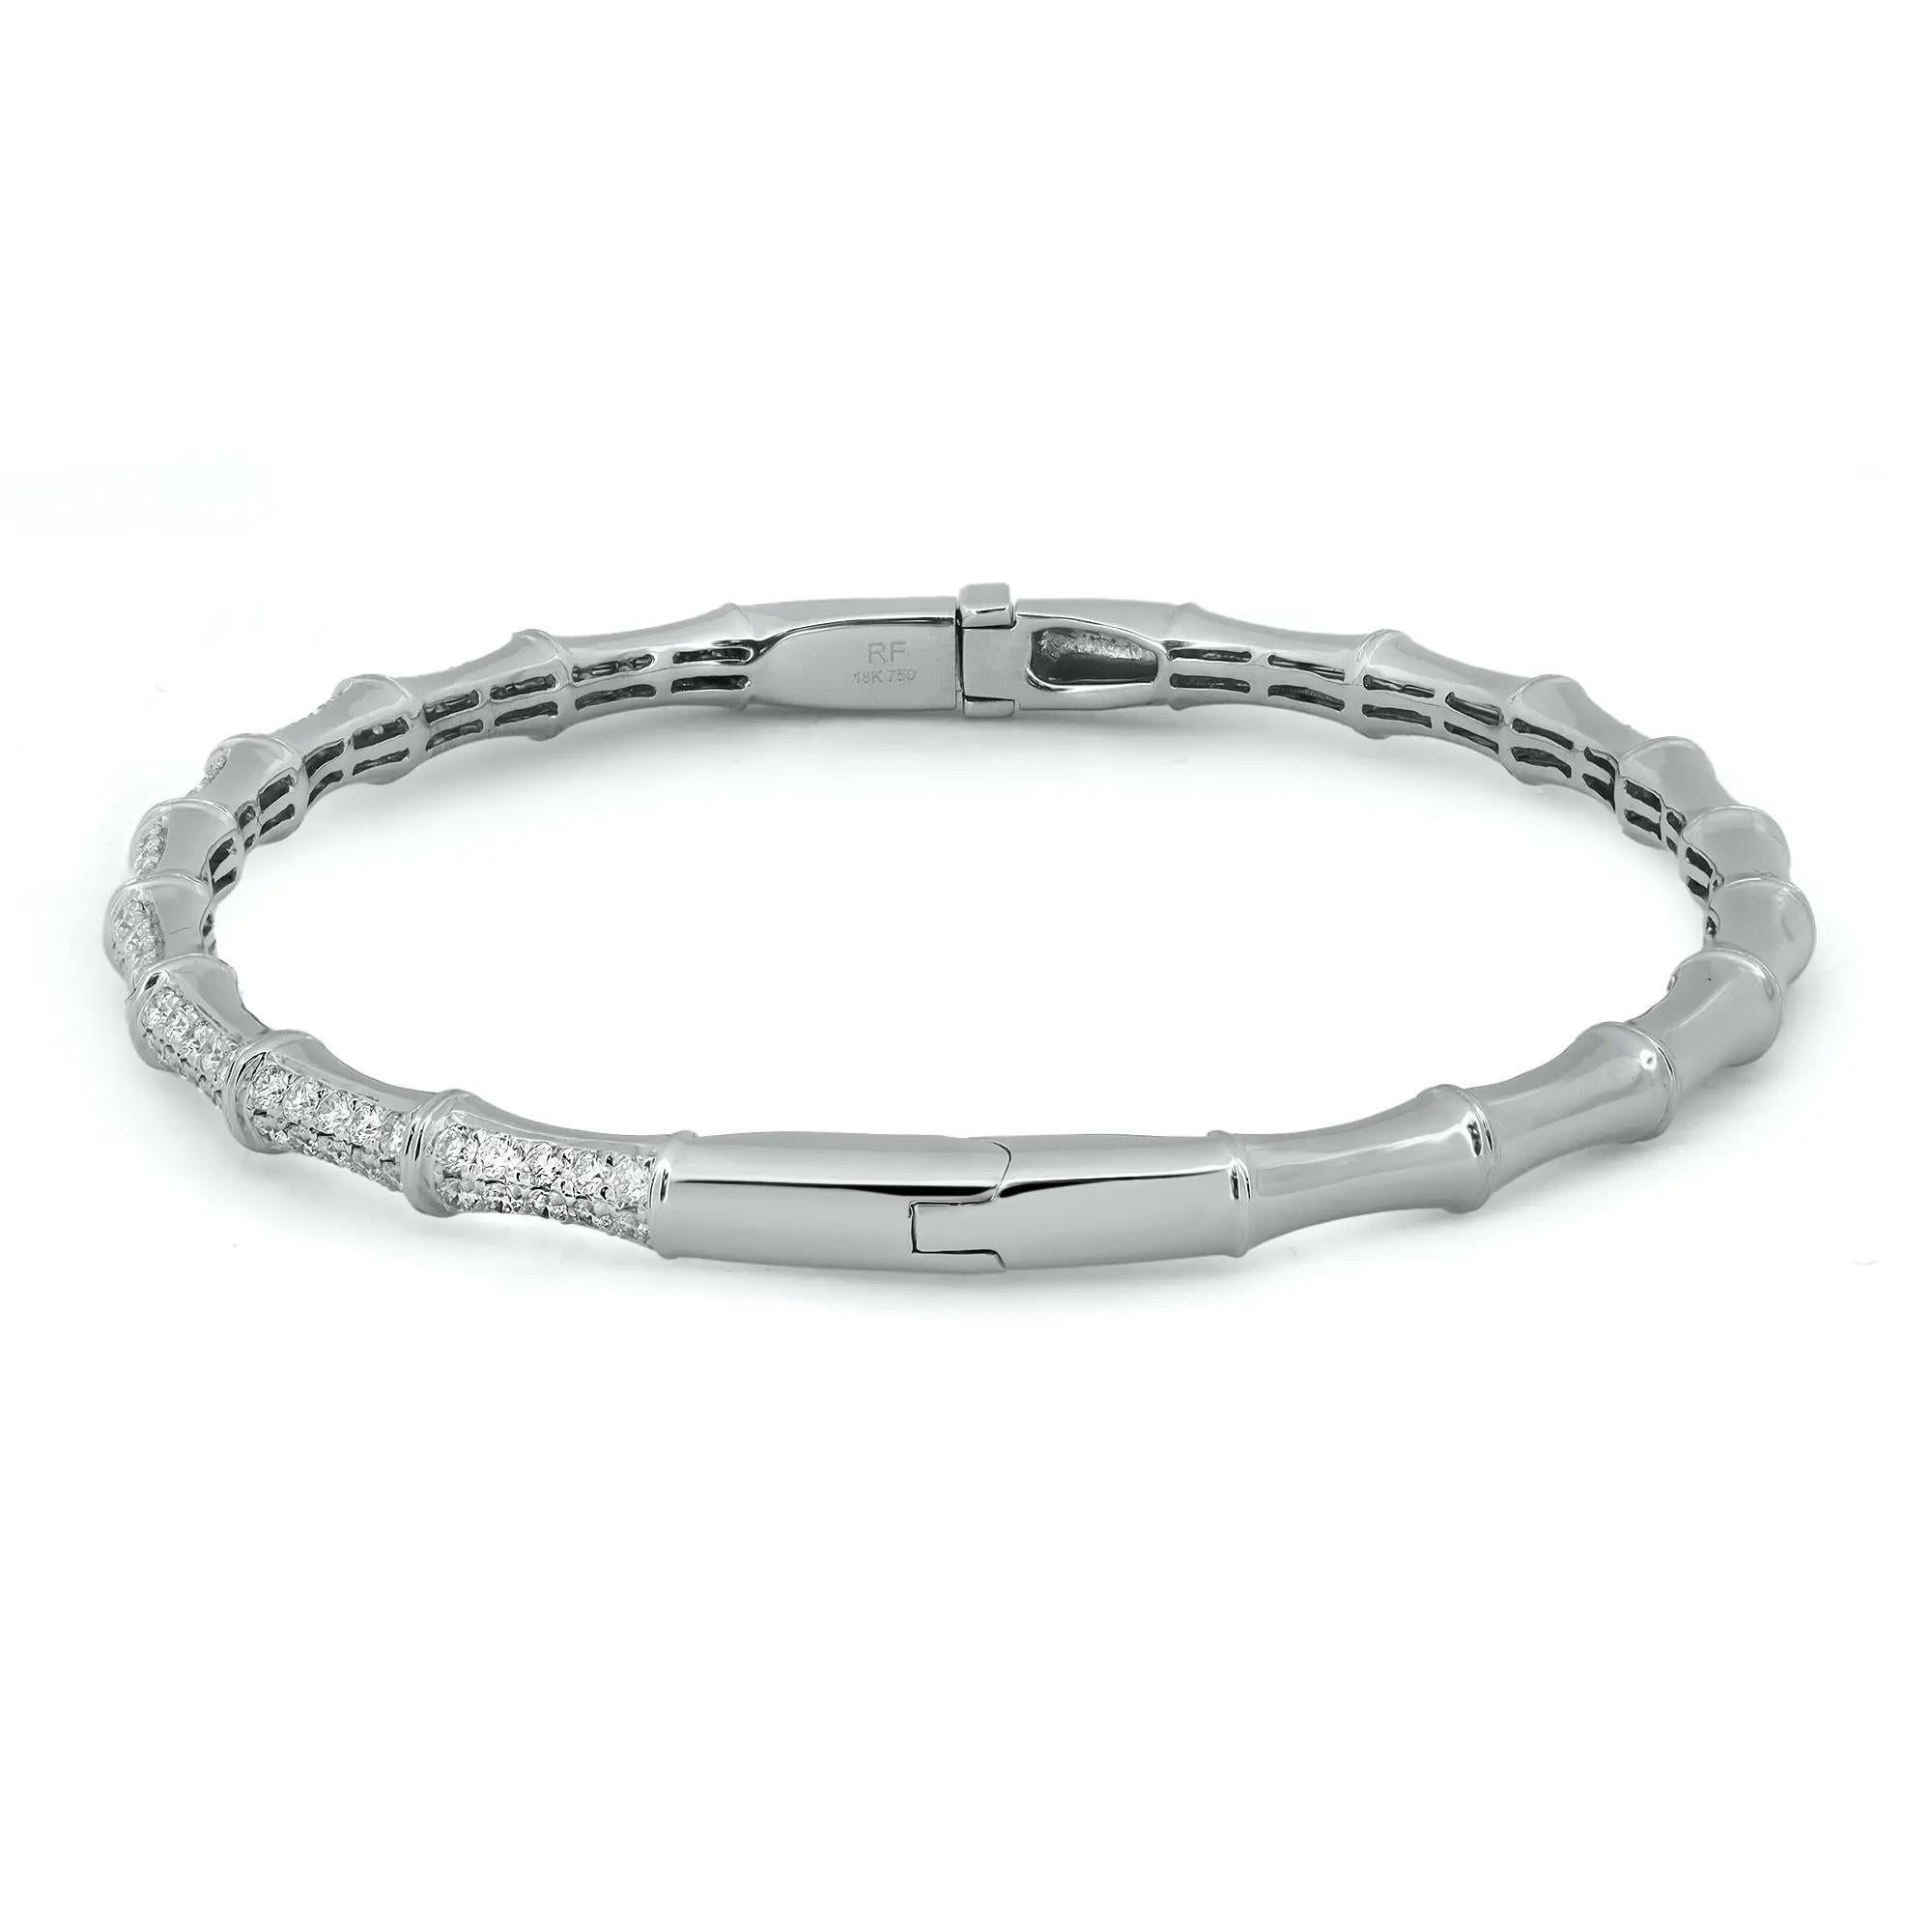 Introducing our 0.92 Carat Diamond Bamboo Bangle Bracelet, a delicate and captivating piece crafted in luxurious 18K white gold. This bracelet beautifully merges nature-inspired design with timeless elegance, featuring a bamboo motif intricately